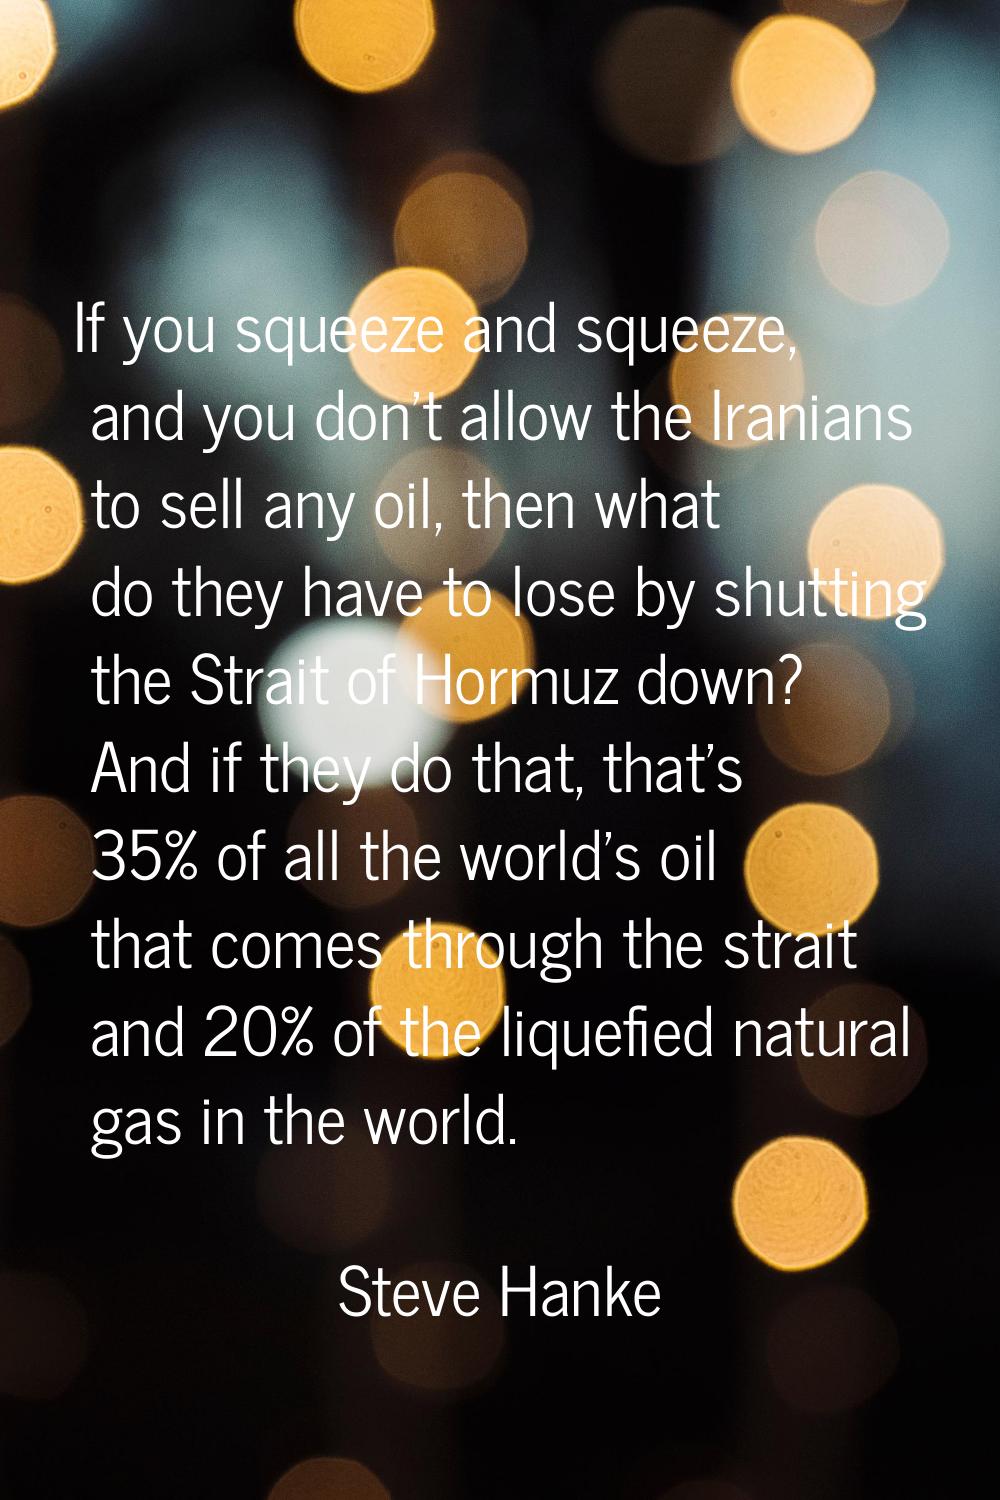 If you squeeze and squeeze, and you don't allow the Iranians to sell any oil, then what do they hav